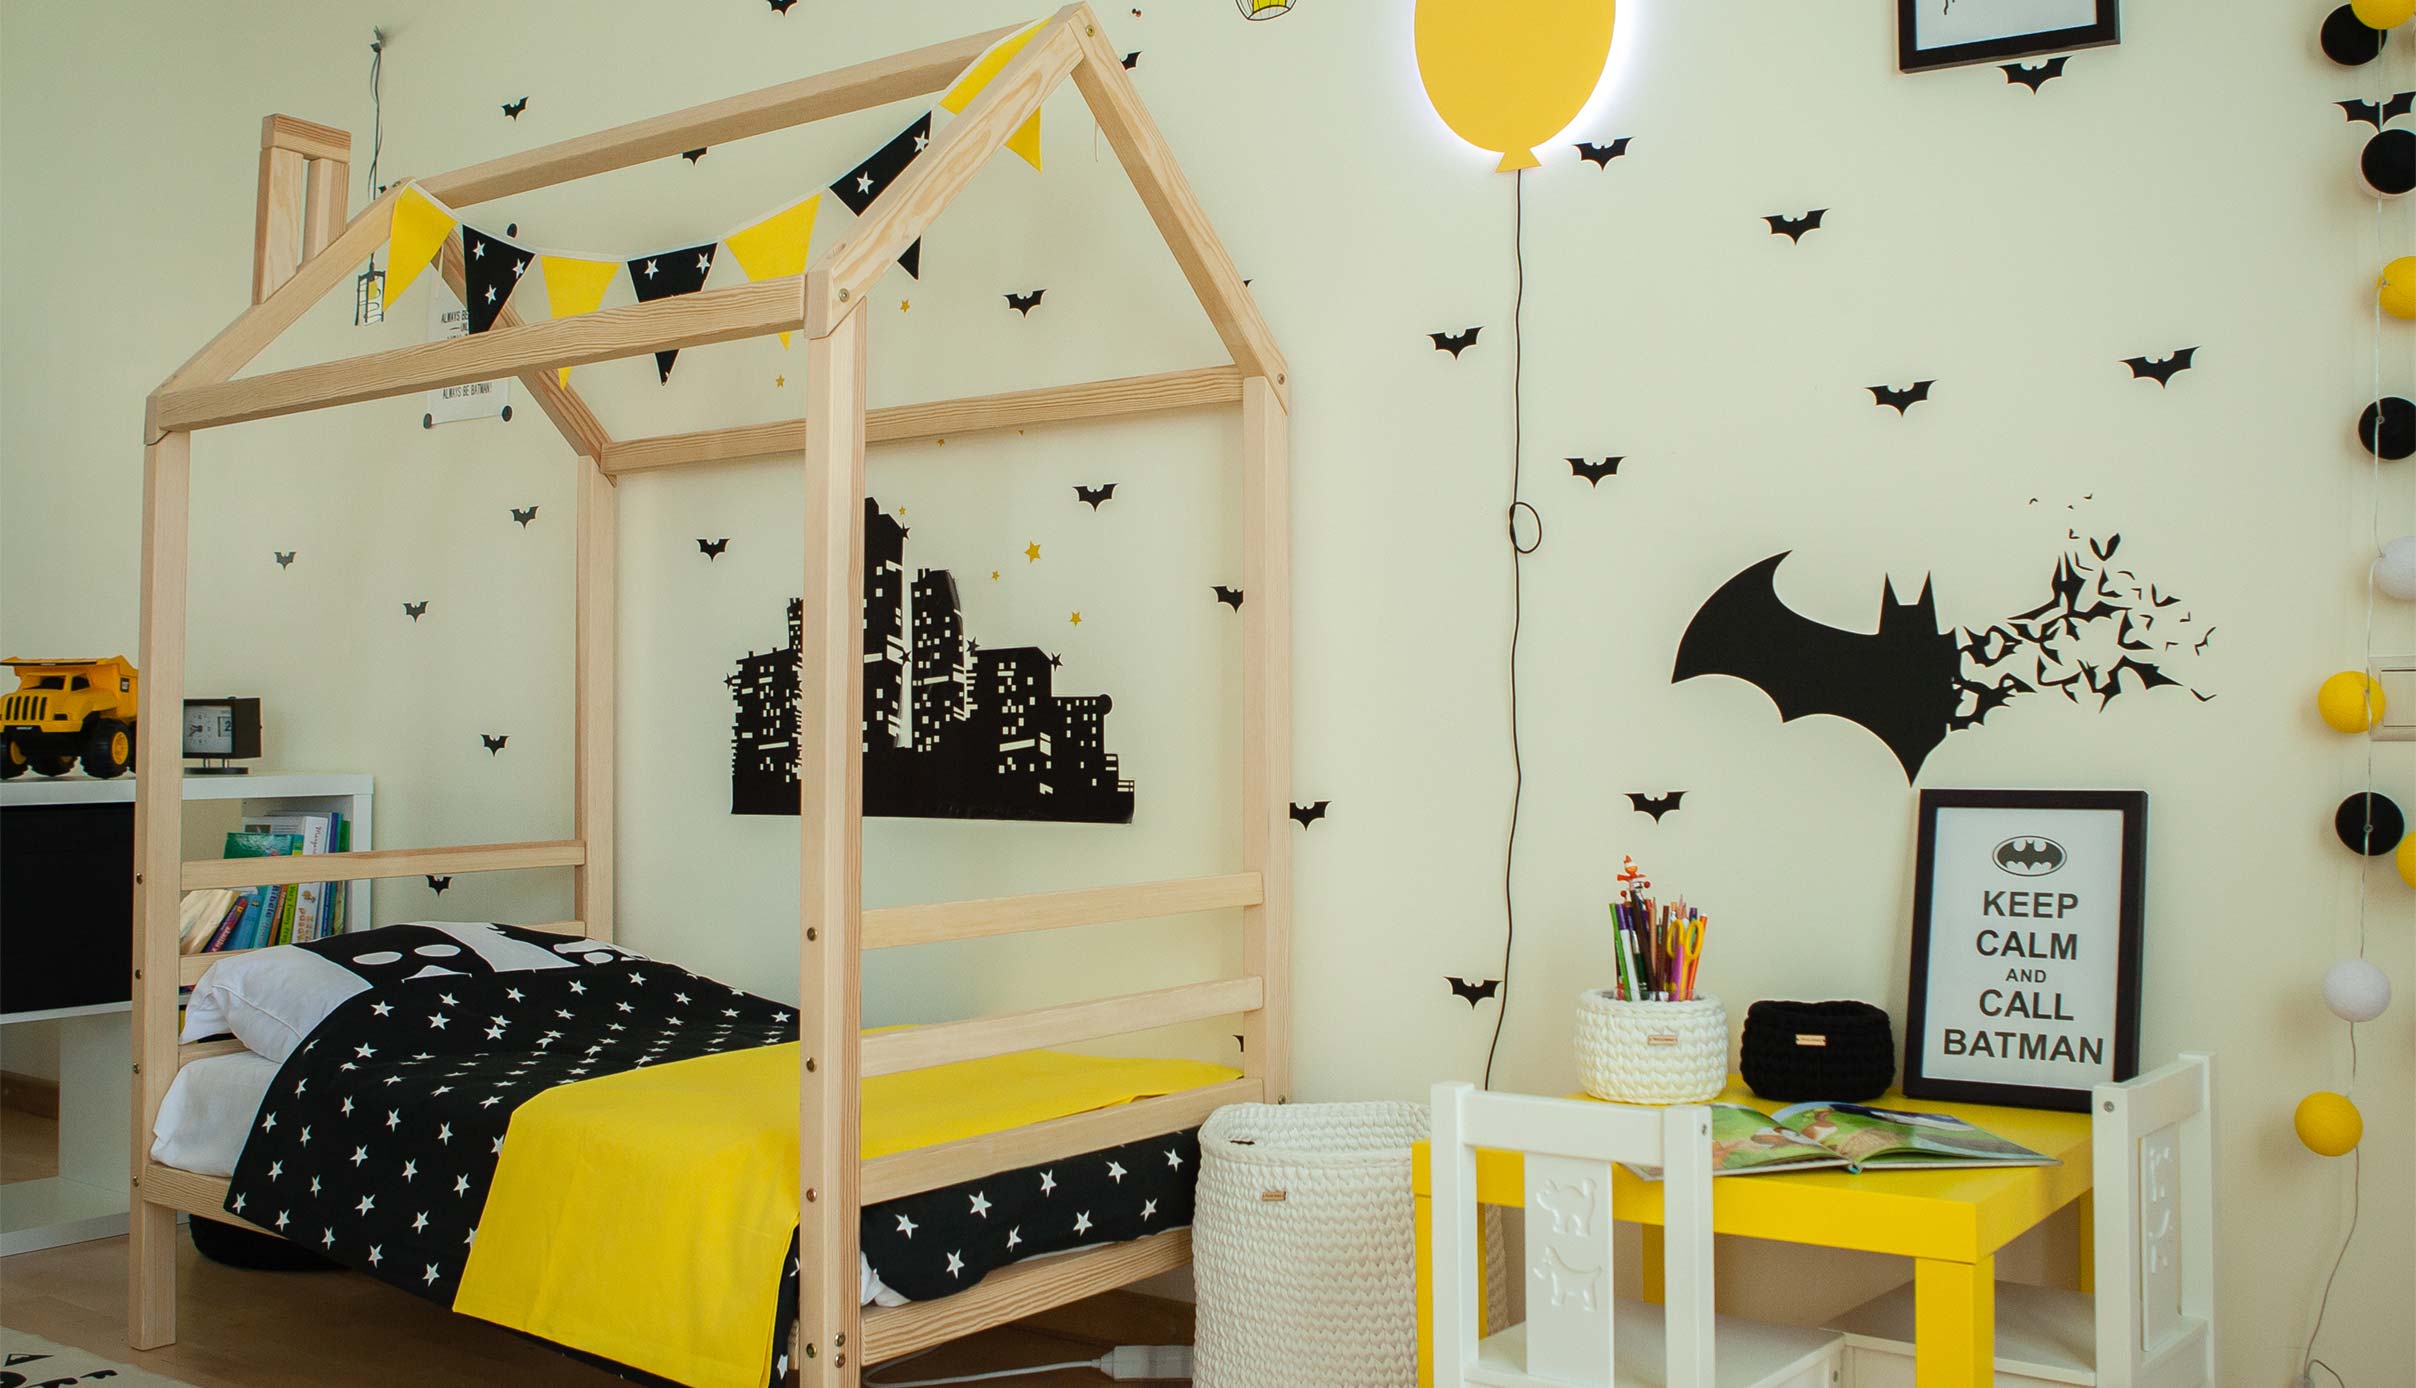 A batman themed bedroom with yellow and black decorations.